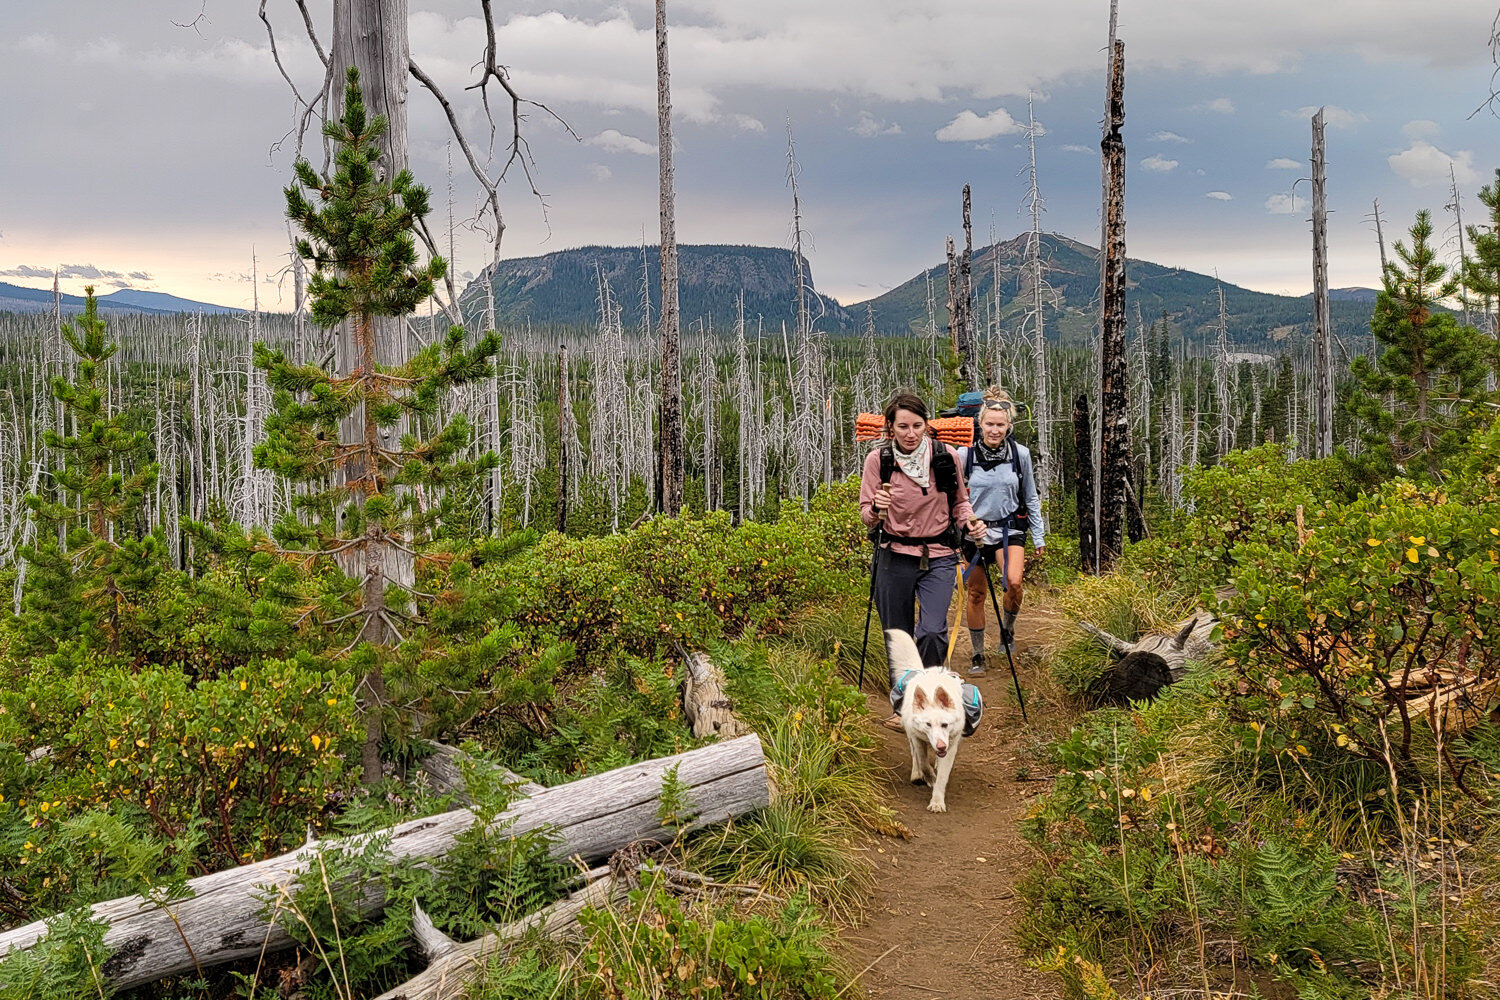 Make sure to review our Tips for Hiking with a Dog post to ensure you and your dog have a safe and fun time on the trail